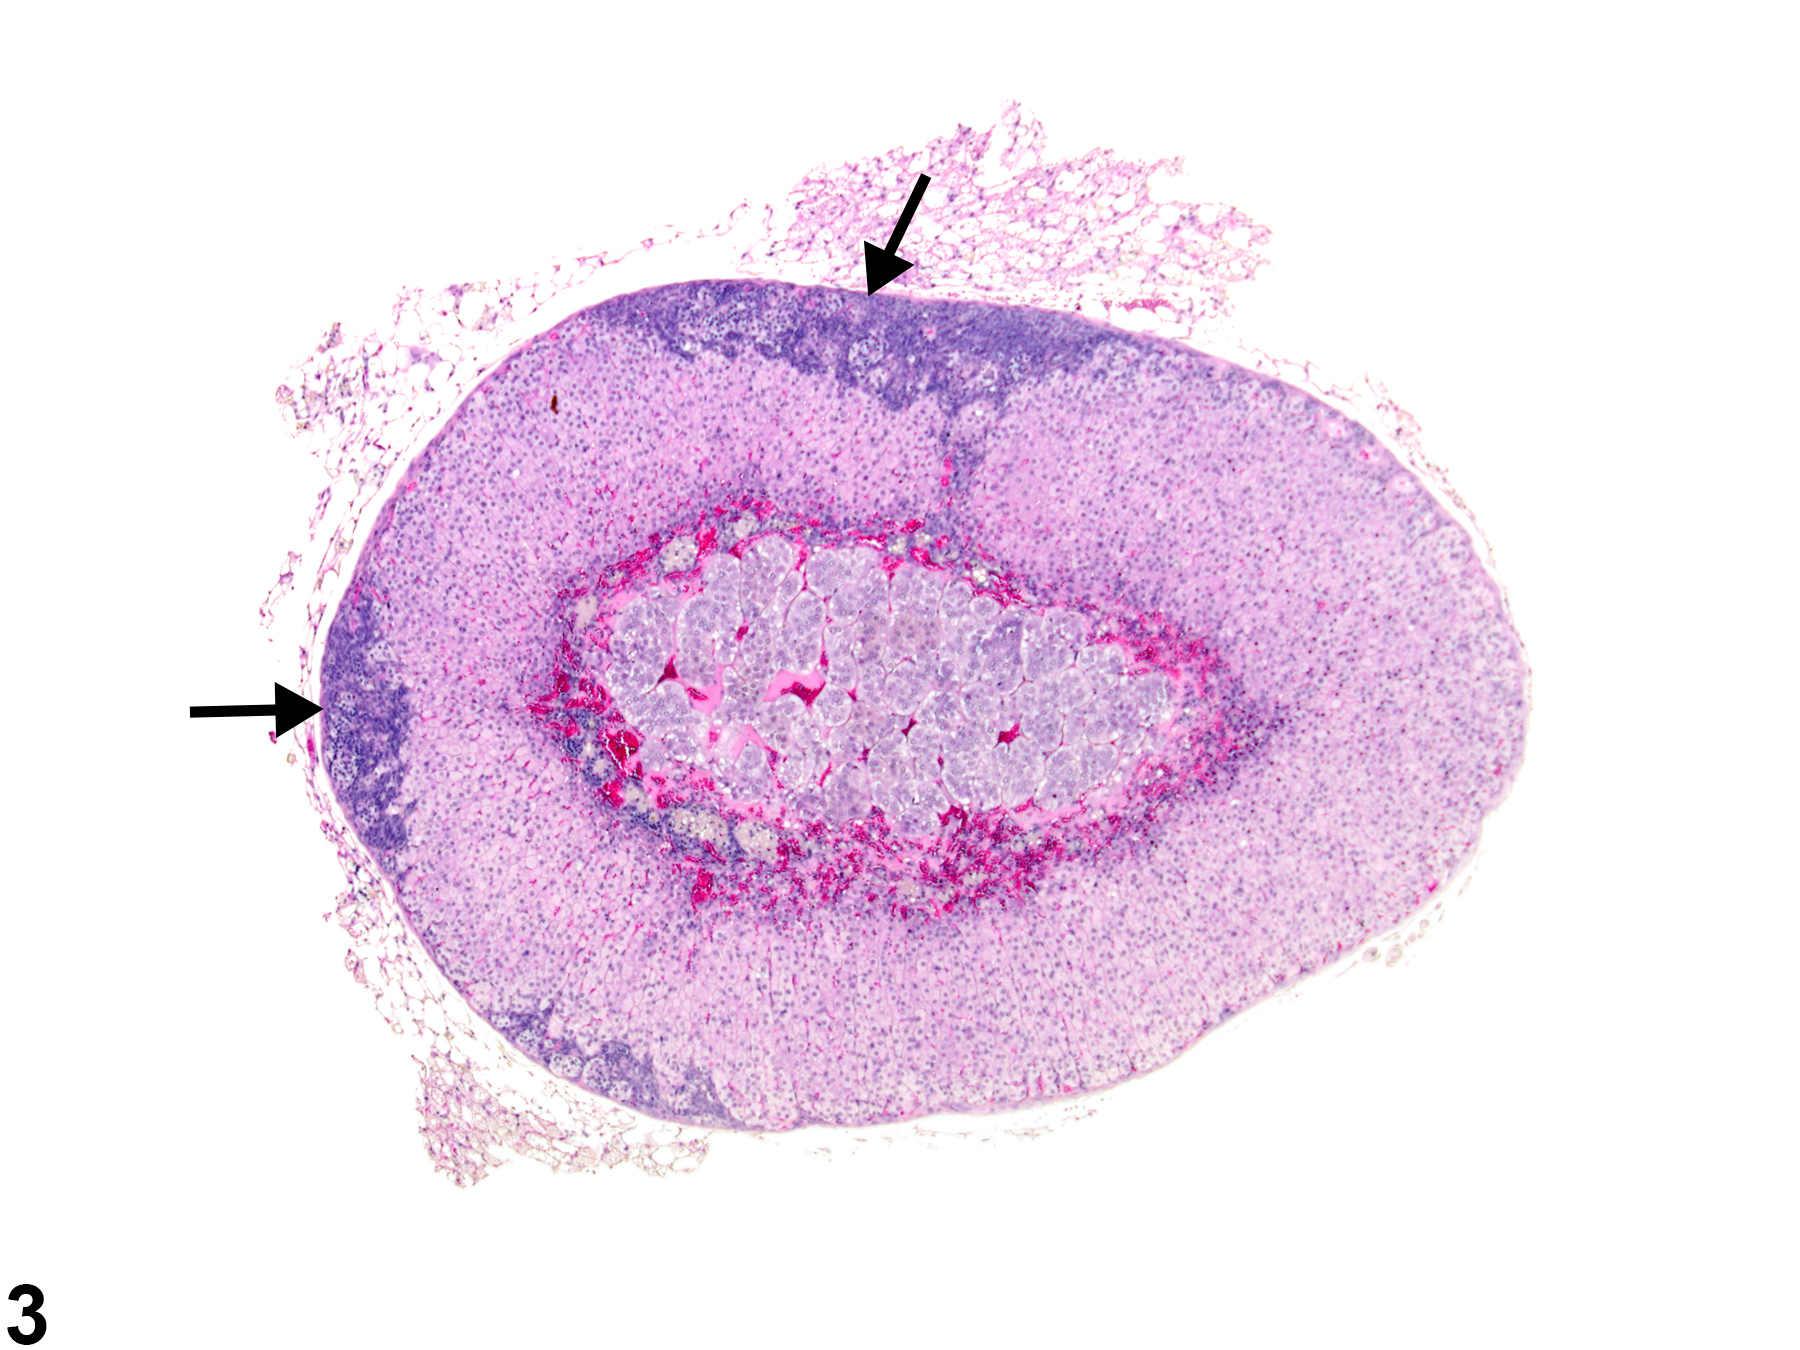 Image of hyperplasia, subcapsular in the adrenal gland cortex from a female B6C3F1/N mouse in a chronic study